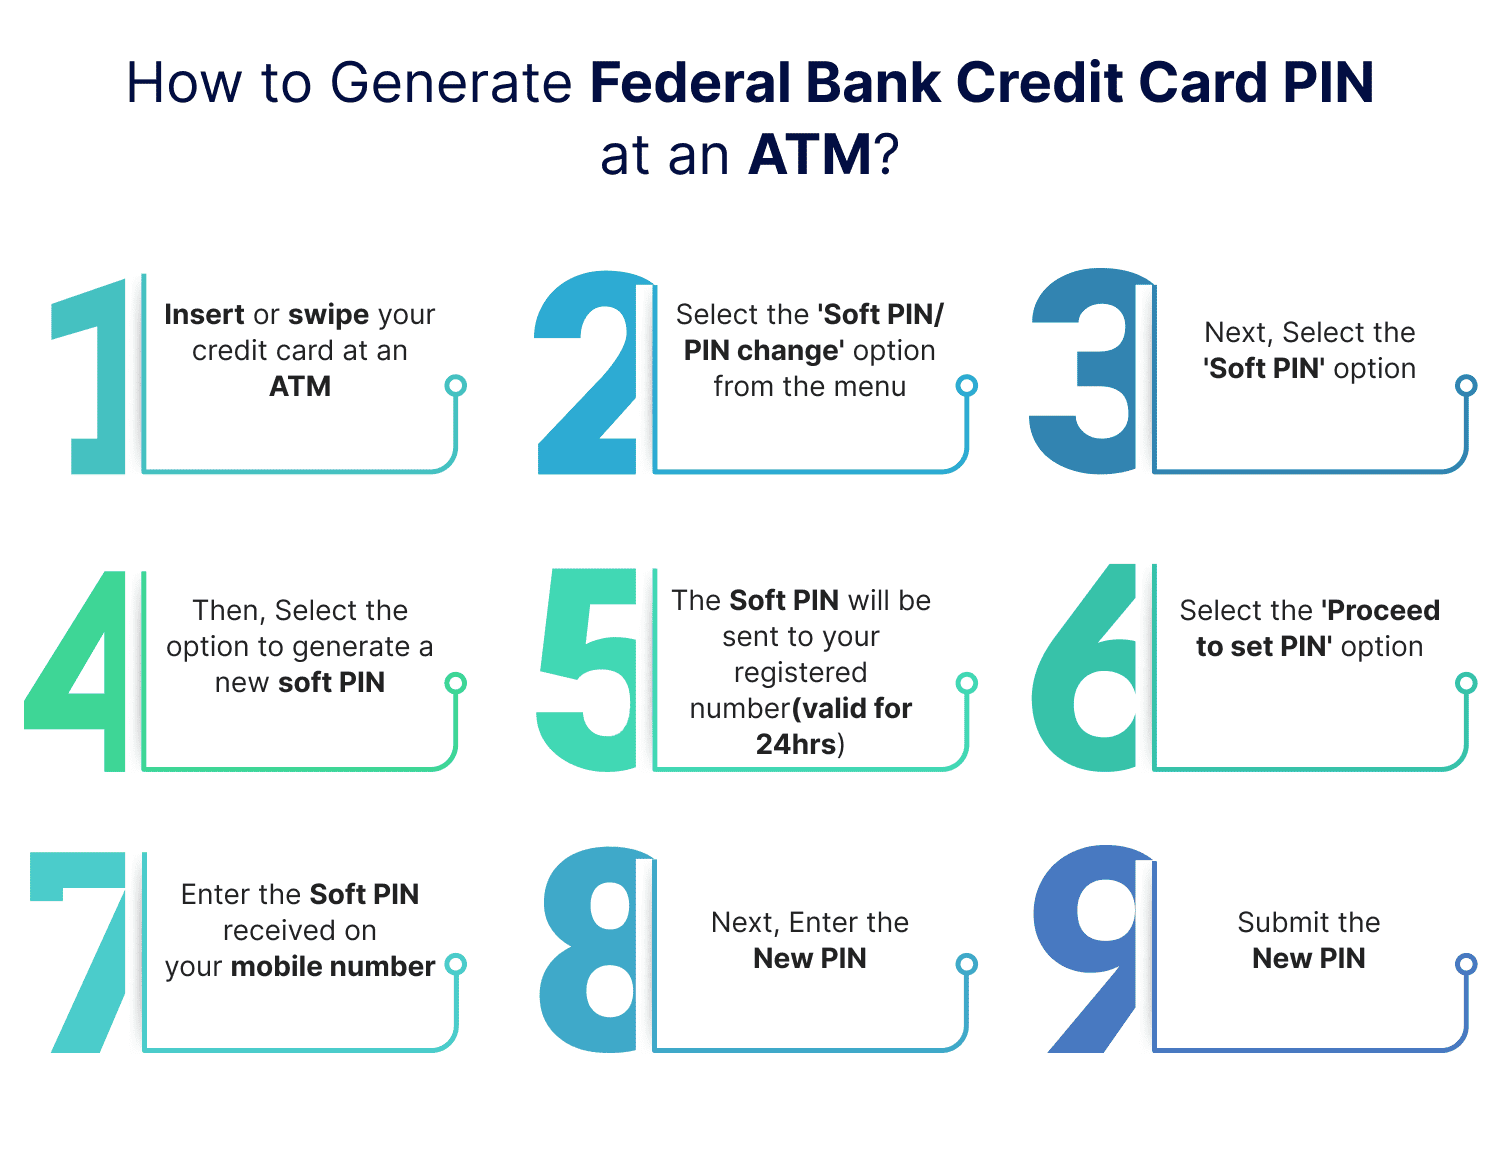 How to Generate Federal Bank Credit Card PIN at an ATM